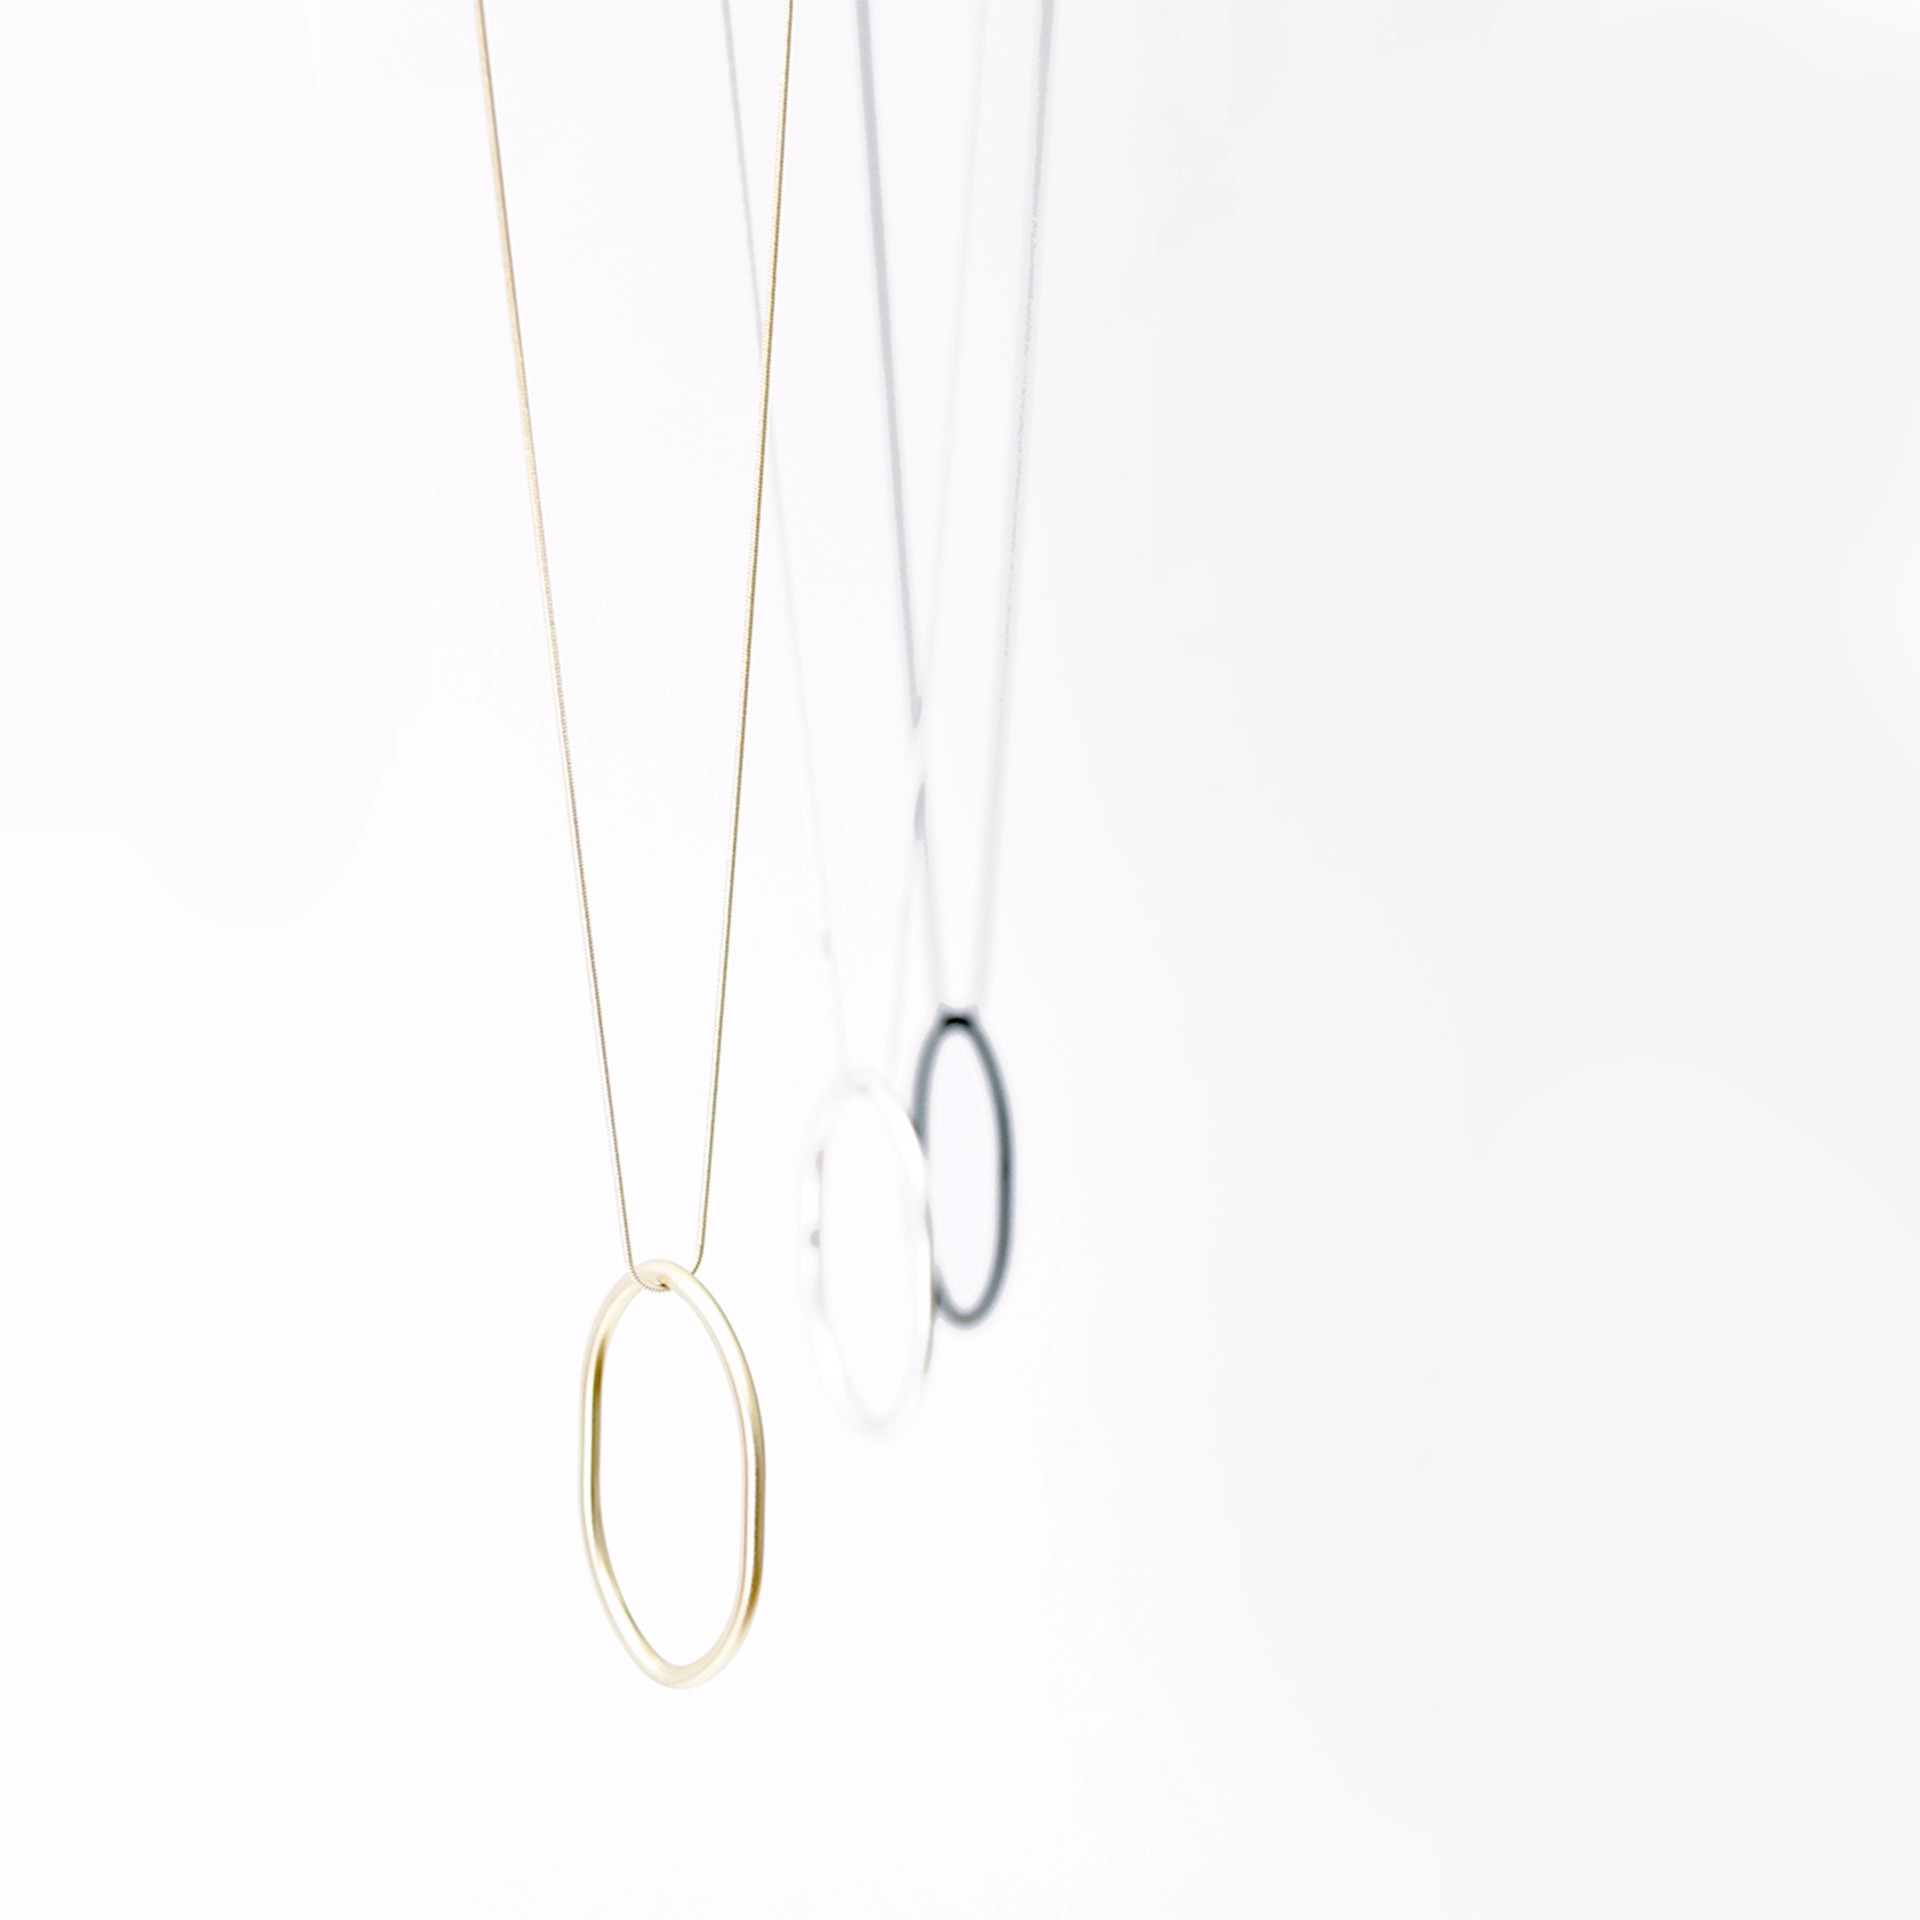 Nil Necklace by Vanassa Chan